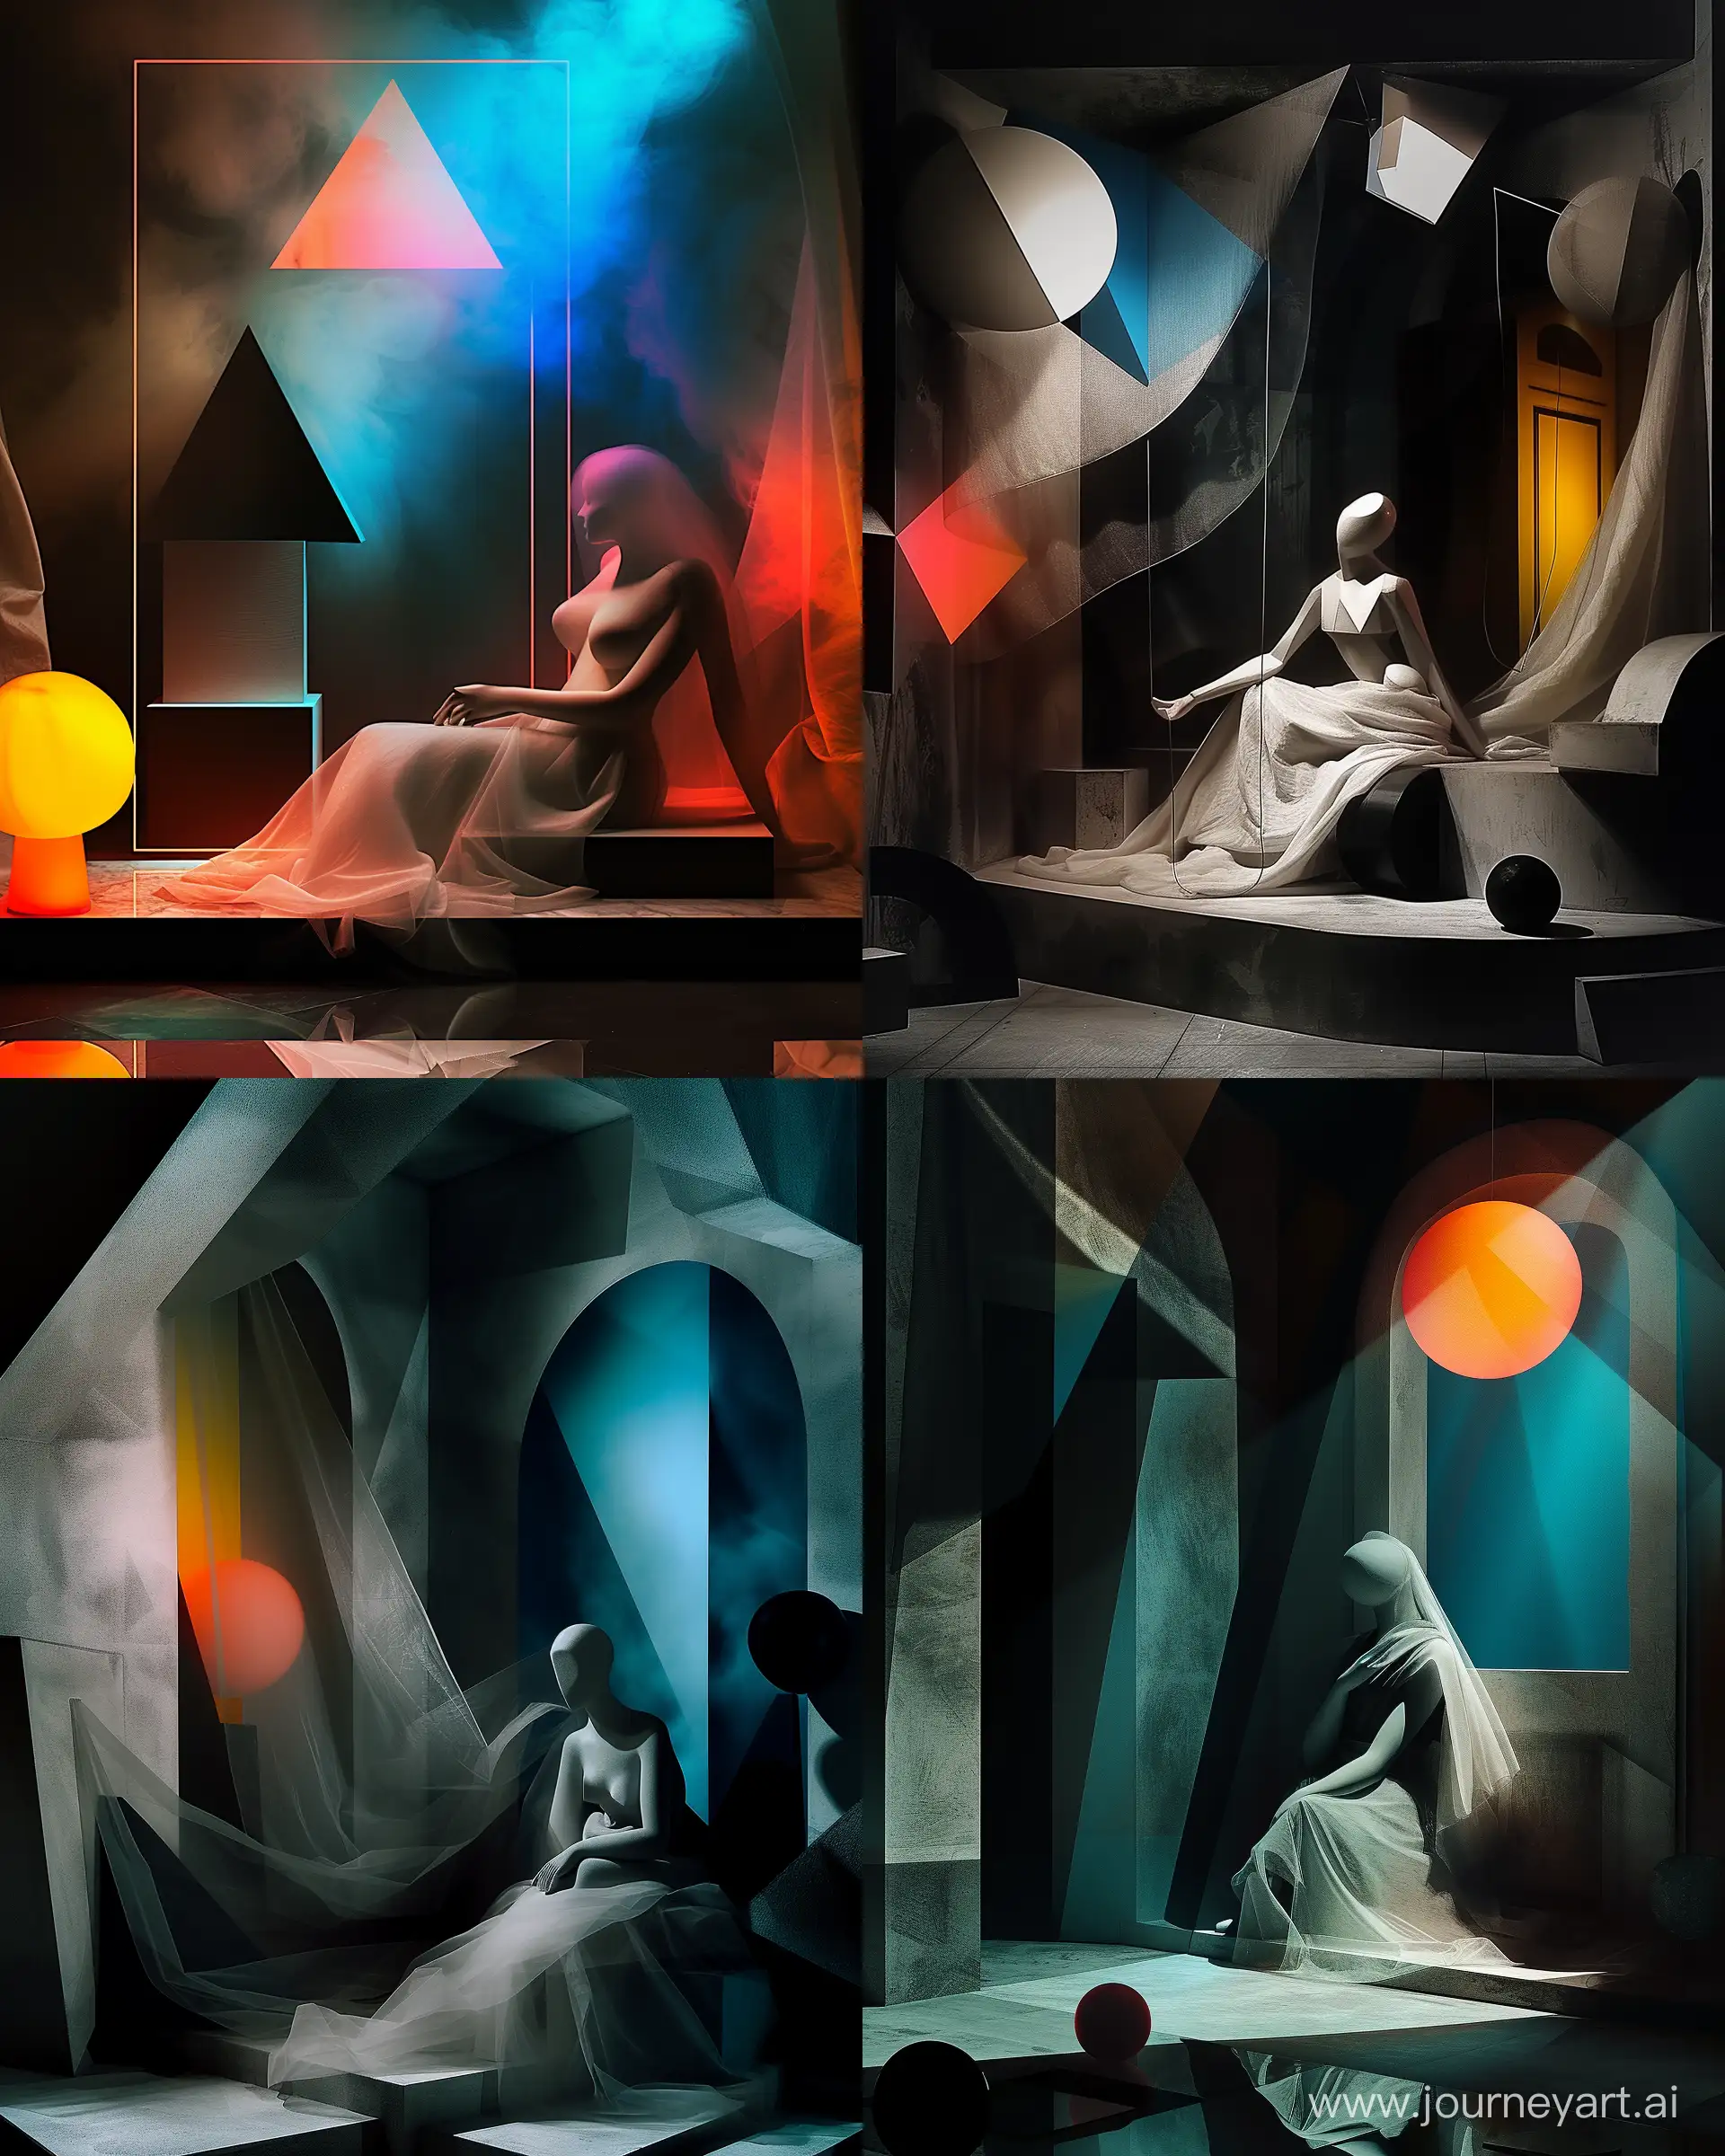 https://i.postimg.cc/k5DC31bg/445ba7fa-1fa0-4c40-a180-ba520503bc37.png, staged photography of an mysterious atmosphere in style of picasso and geometrics shapes --ar 4:5